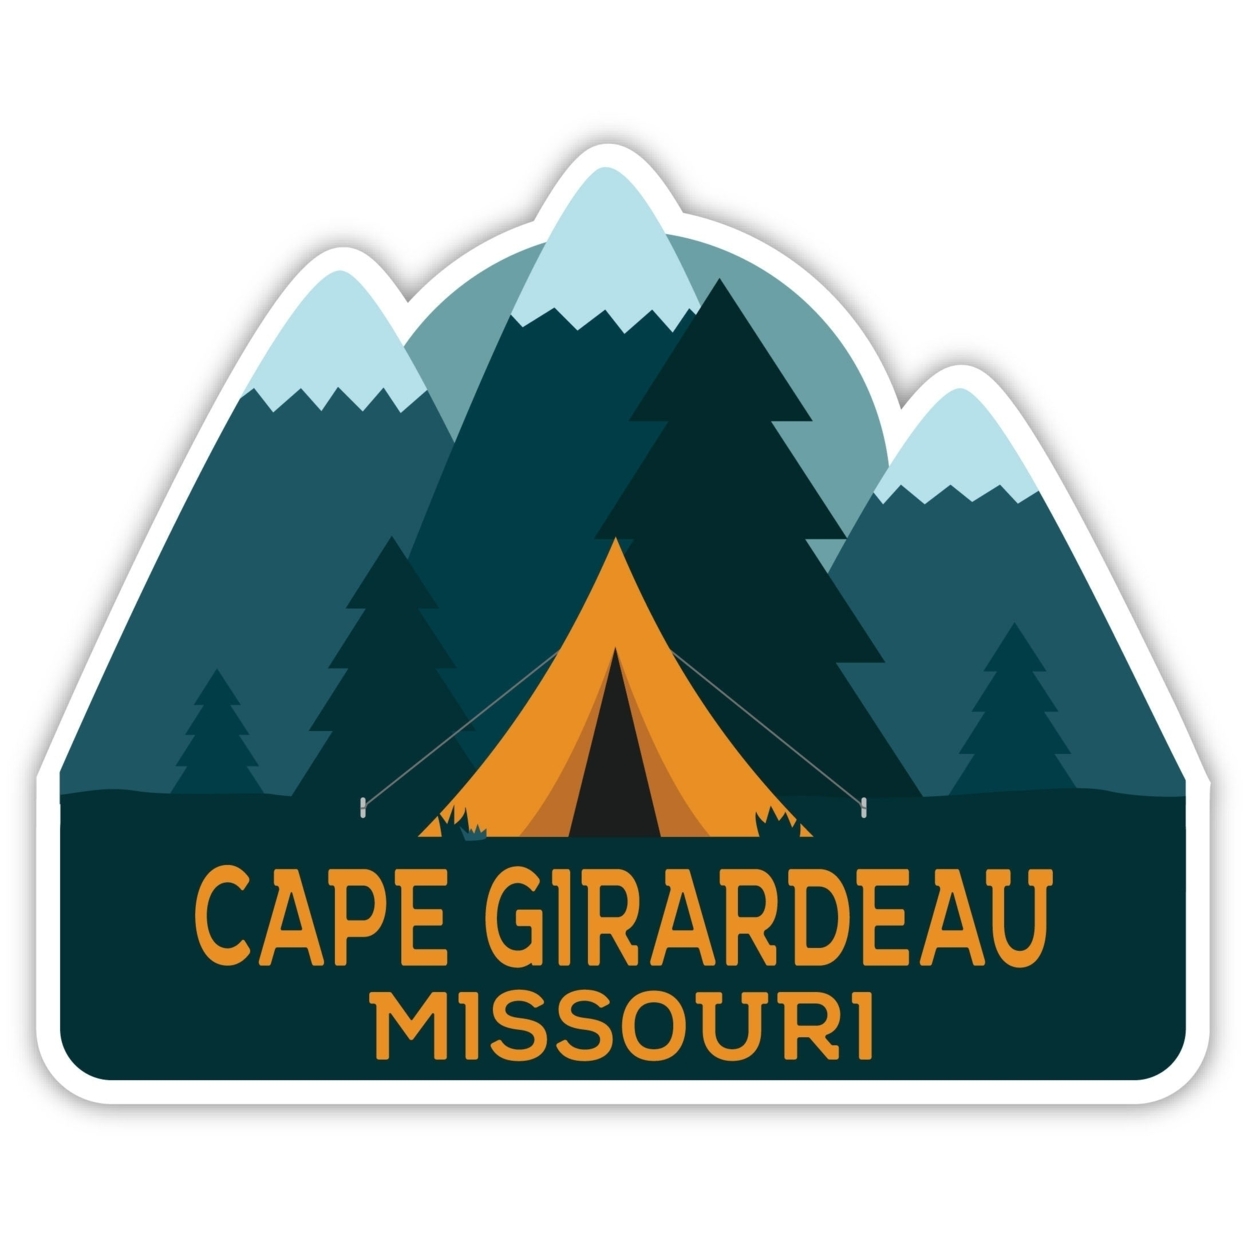 Cape Girardeau Missouri Souvenir Decorative Stickers (Choose Theme And Size) - 4-Pack, 8-Inch, Great Outdoors